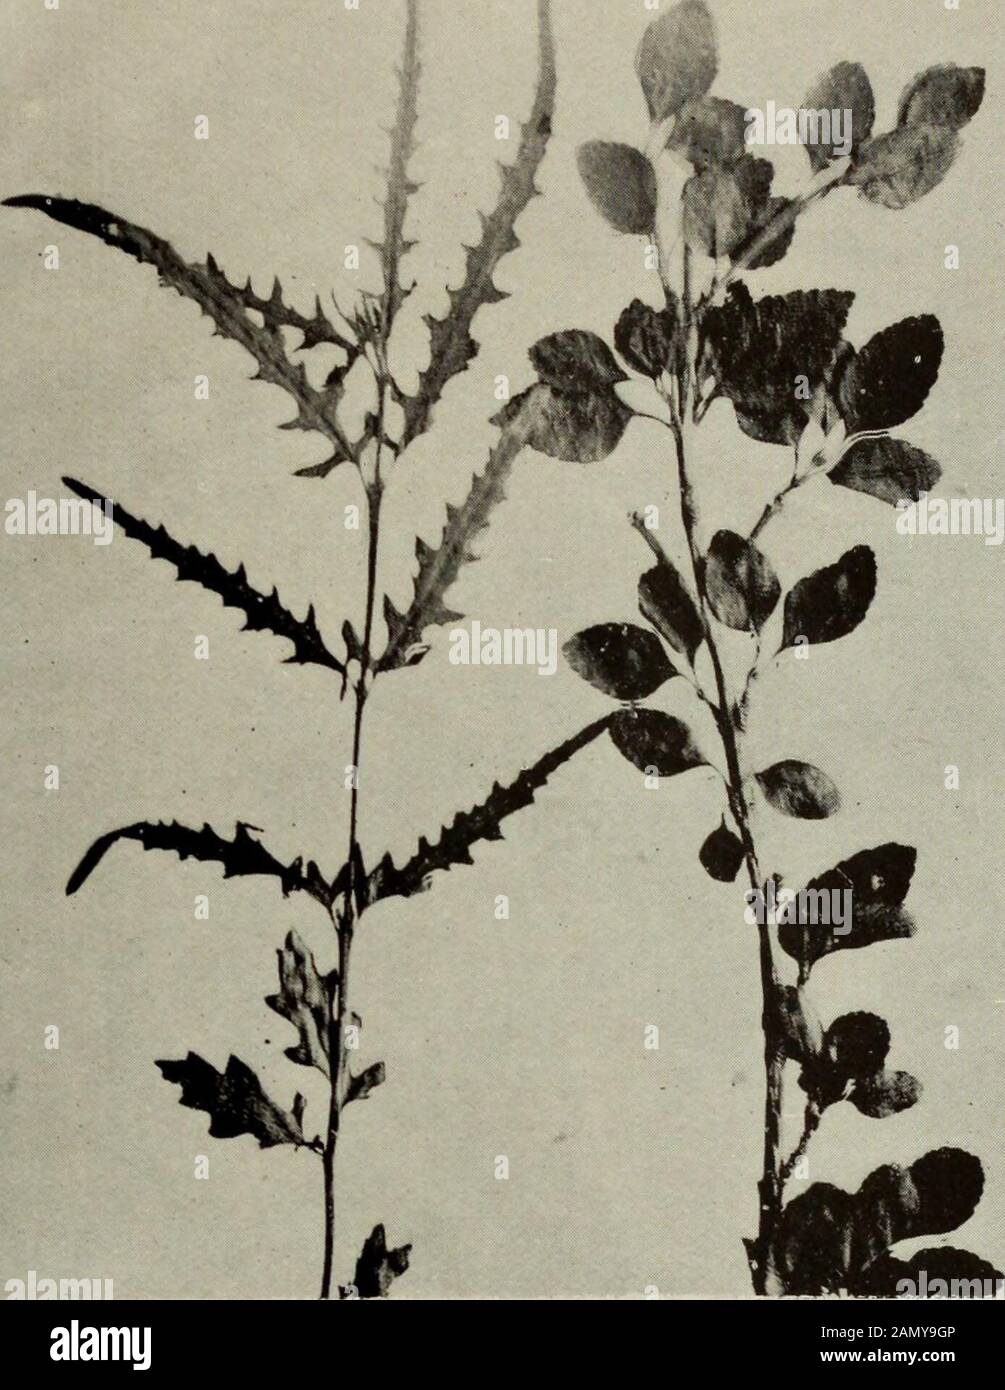 Transactions of the Royal Society of New Zealand . Carmichaelia is shown by their abundantproduction of leaves in shady stations. (2.) Shrubs with an abundance of leaves, sometimes very thin, whenjuvenile, but of the cupressoid form when adult—e.g., certain Taxaceae(see Griff en, 1908), whipcord veronicas, and some species of Helichrysumbelonging to the section Ozothamnus. * The seed was very kindly sent to me by Dr. Eug. Autran, of Buenos Ayres, andthe seedlings were raised by Mr. T. W. Adams, to whom I am greatly indebted. f The divaricating form of Elaeocarpus Hooklrianus and the juvenile P Stock Photo